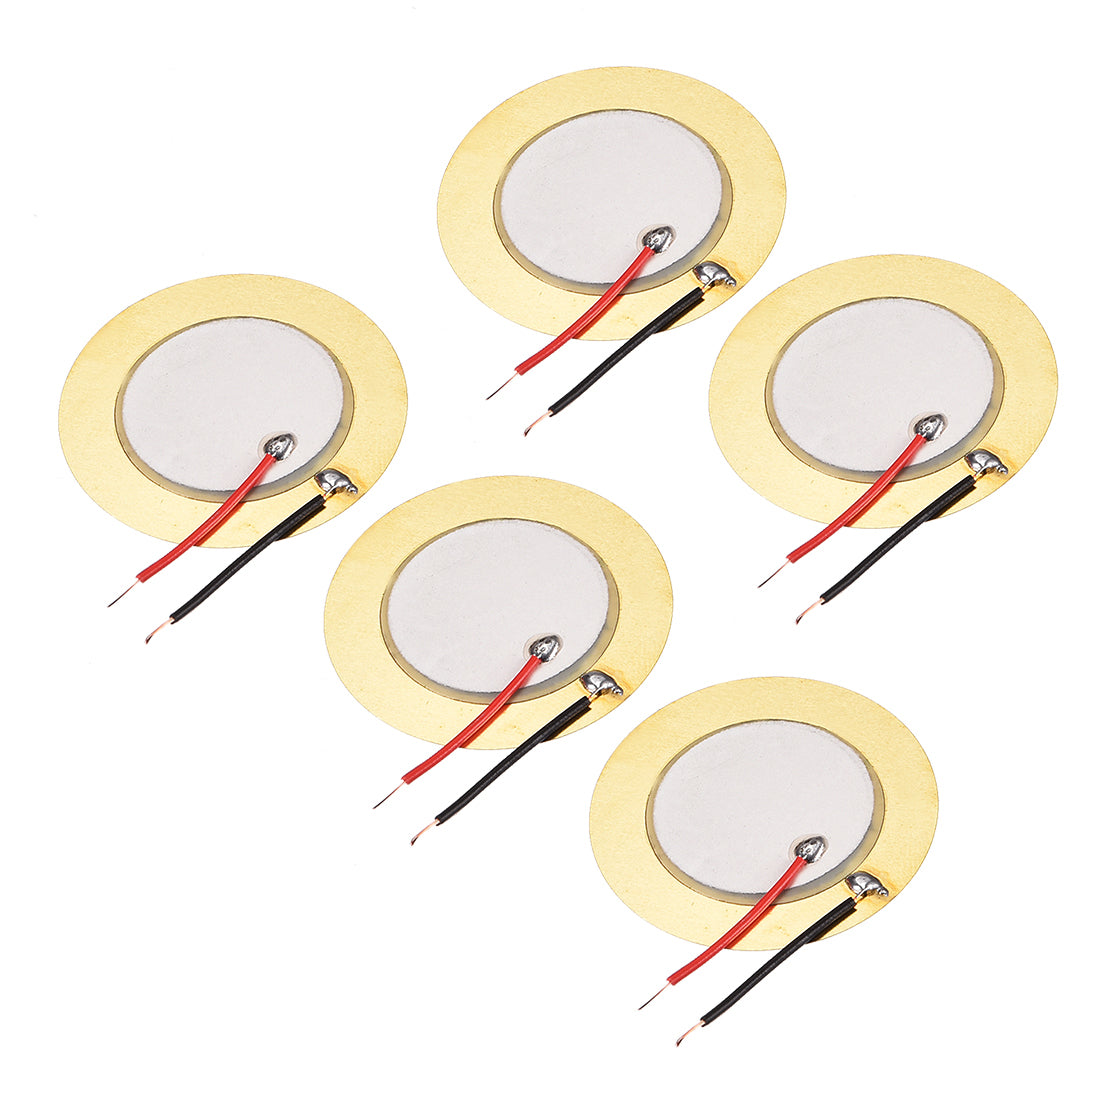 uxcell Uxcell 5 Pcs Piezo Discs 35mm Acoustic Pickup Transducer Microphone Trigger Buzzer Drum Guitar